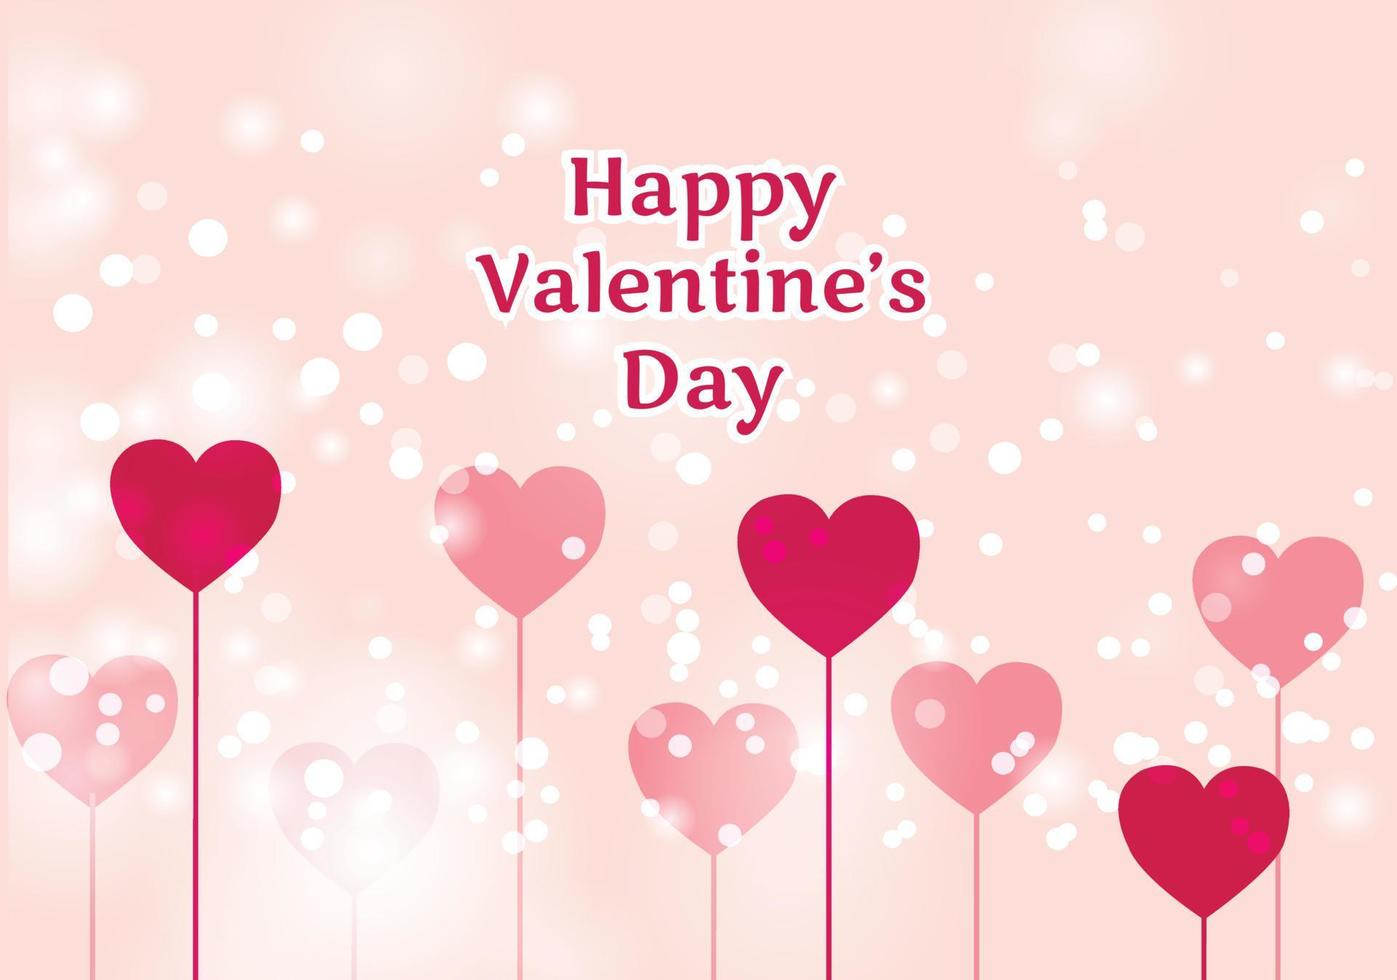 Happy Valentine's Day Greeting Card Vector Illustration